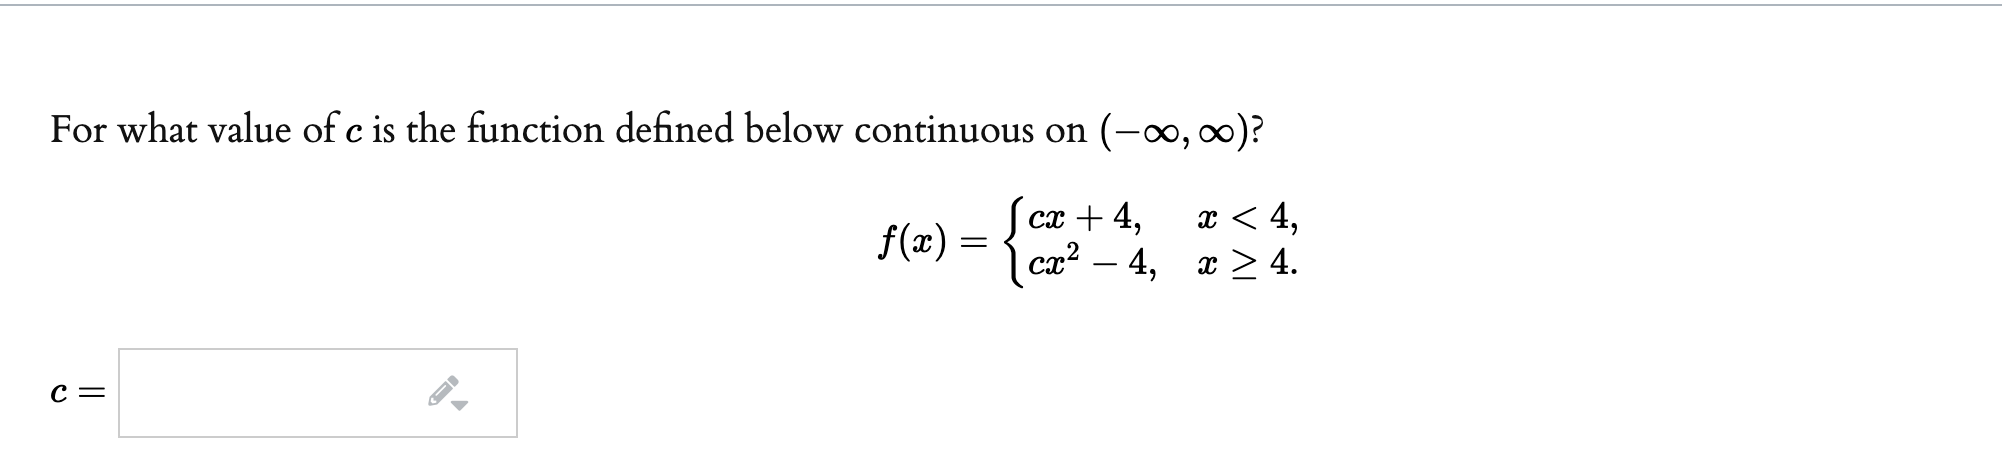 For what value of c is the function defined below continuous on (-∞, )?
сх + 4,
x < 4,
ca² –
ст — 4, т>4.
x > 4.
f(x) =
C =
